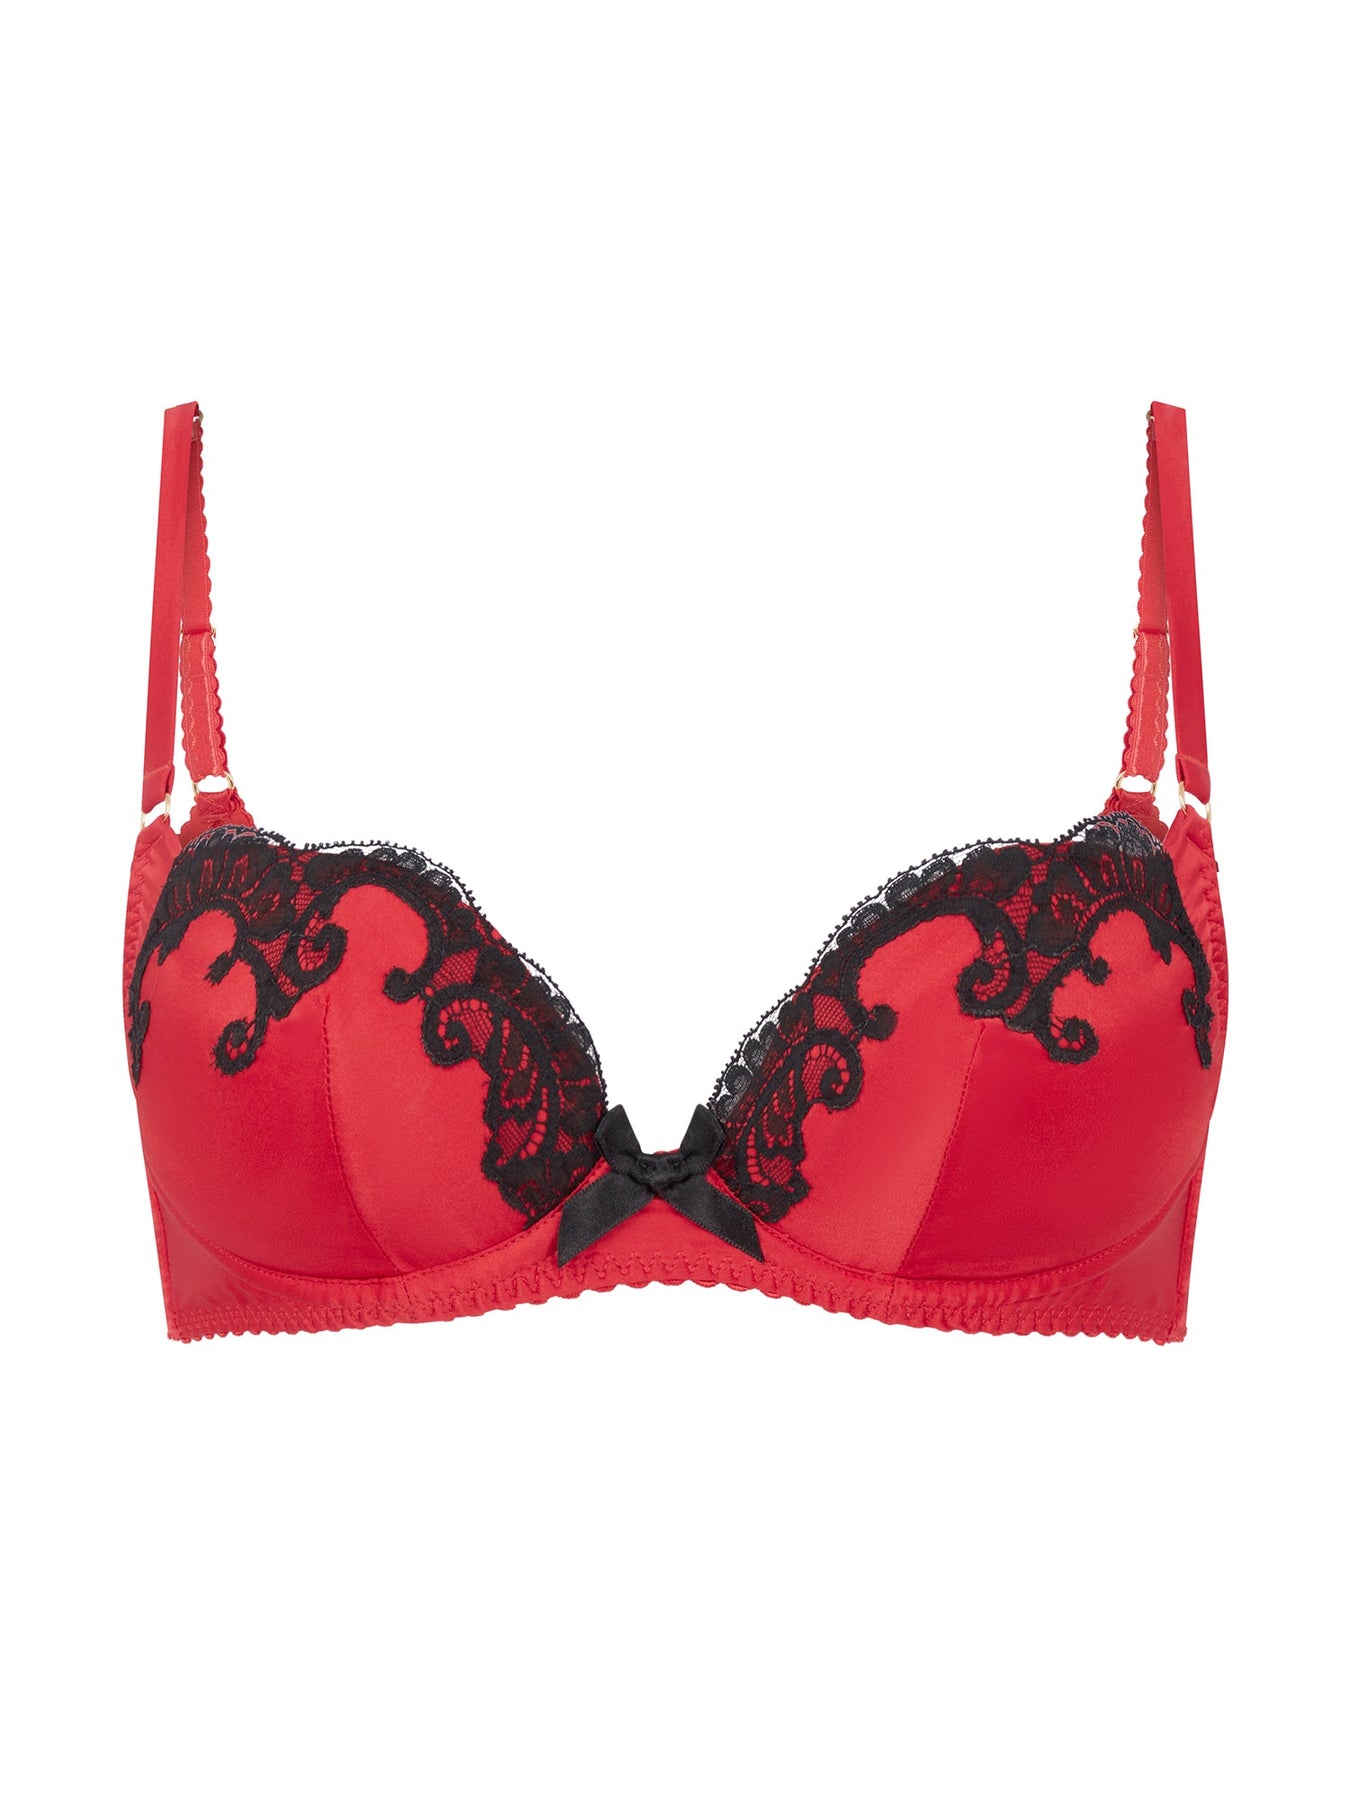 Agent Provocateur, Molly Red Bra, Red Lingerie